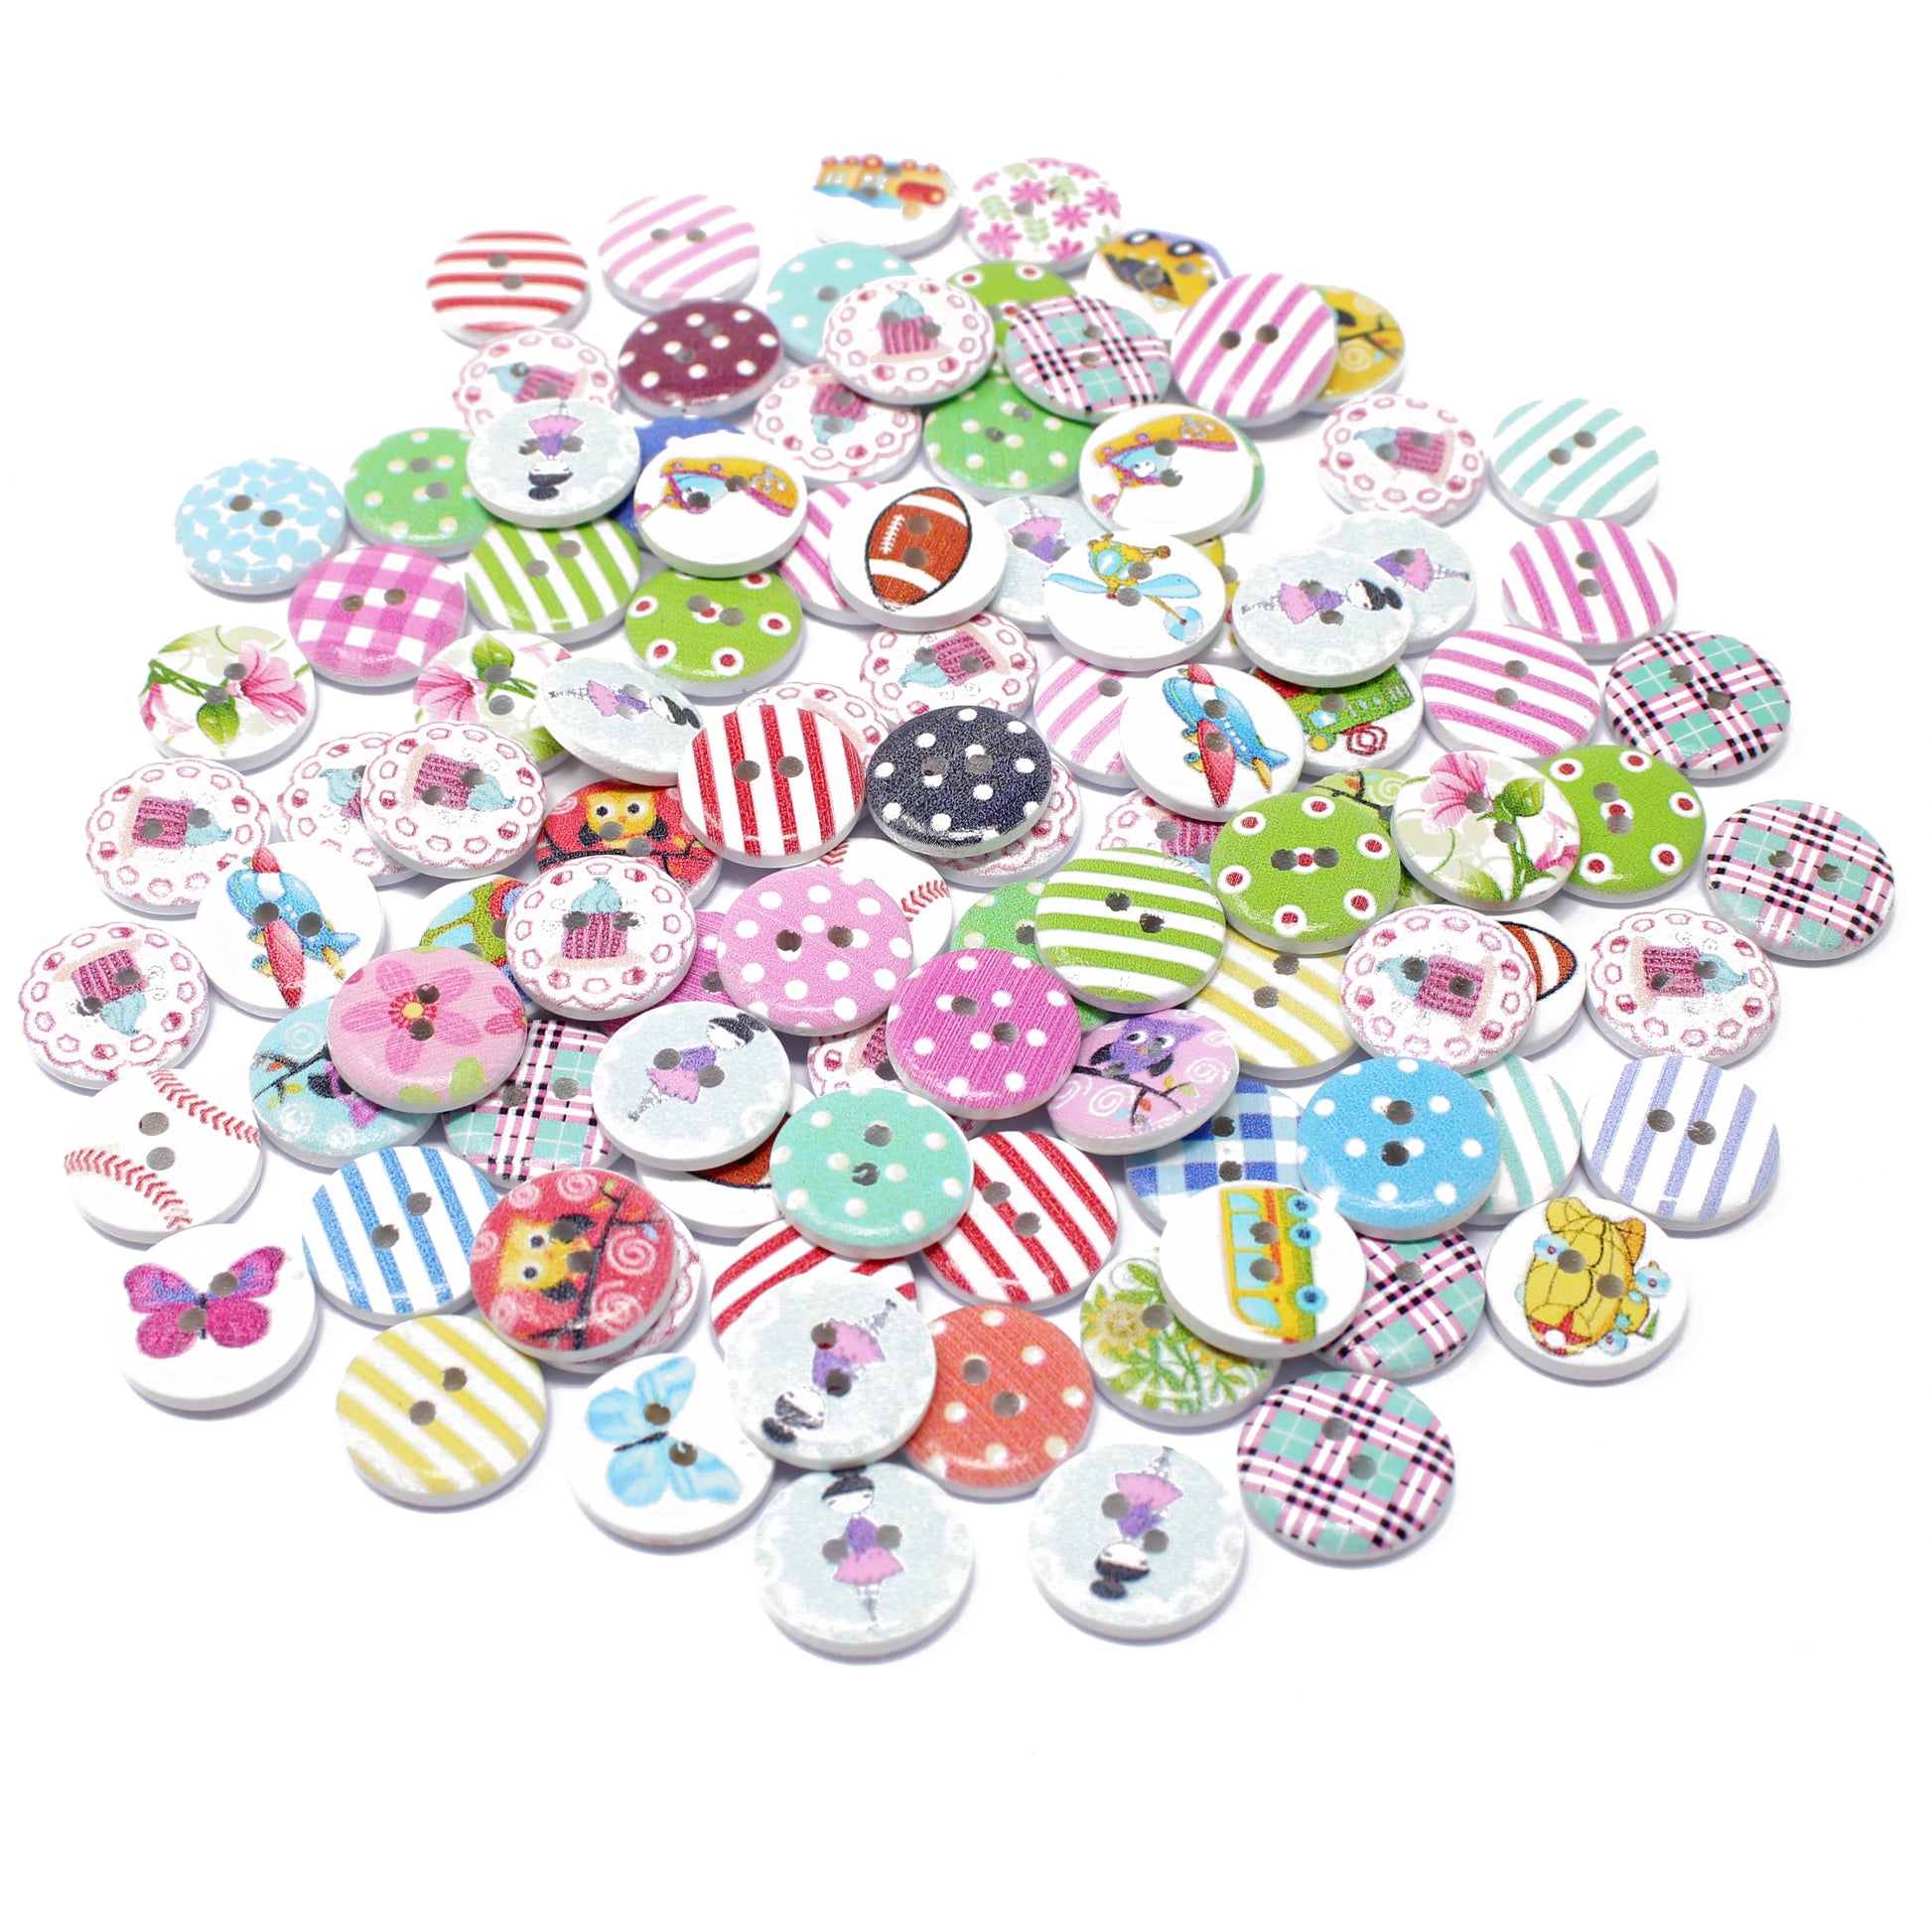 Mixed pack 100 Mixed 15mm Round Wooden Craft Buttons